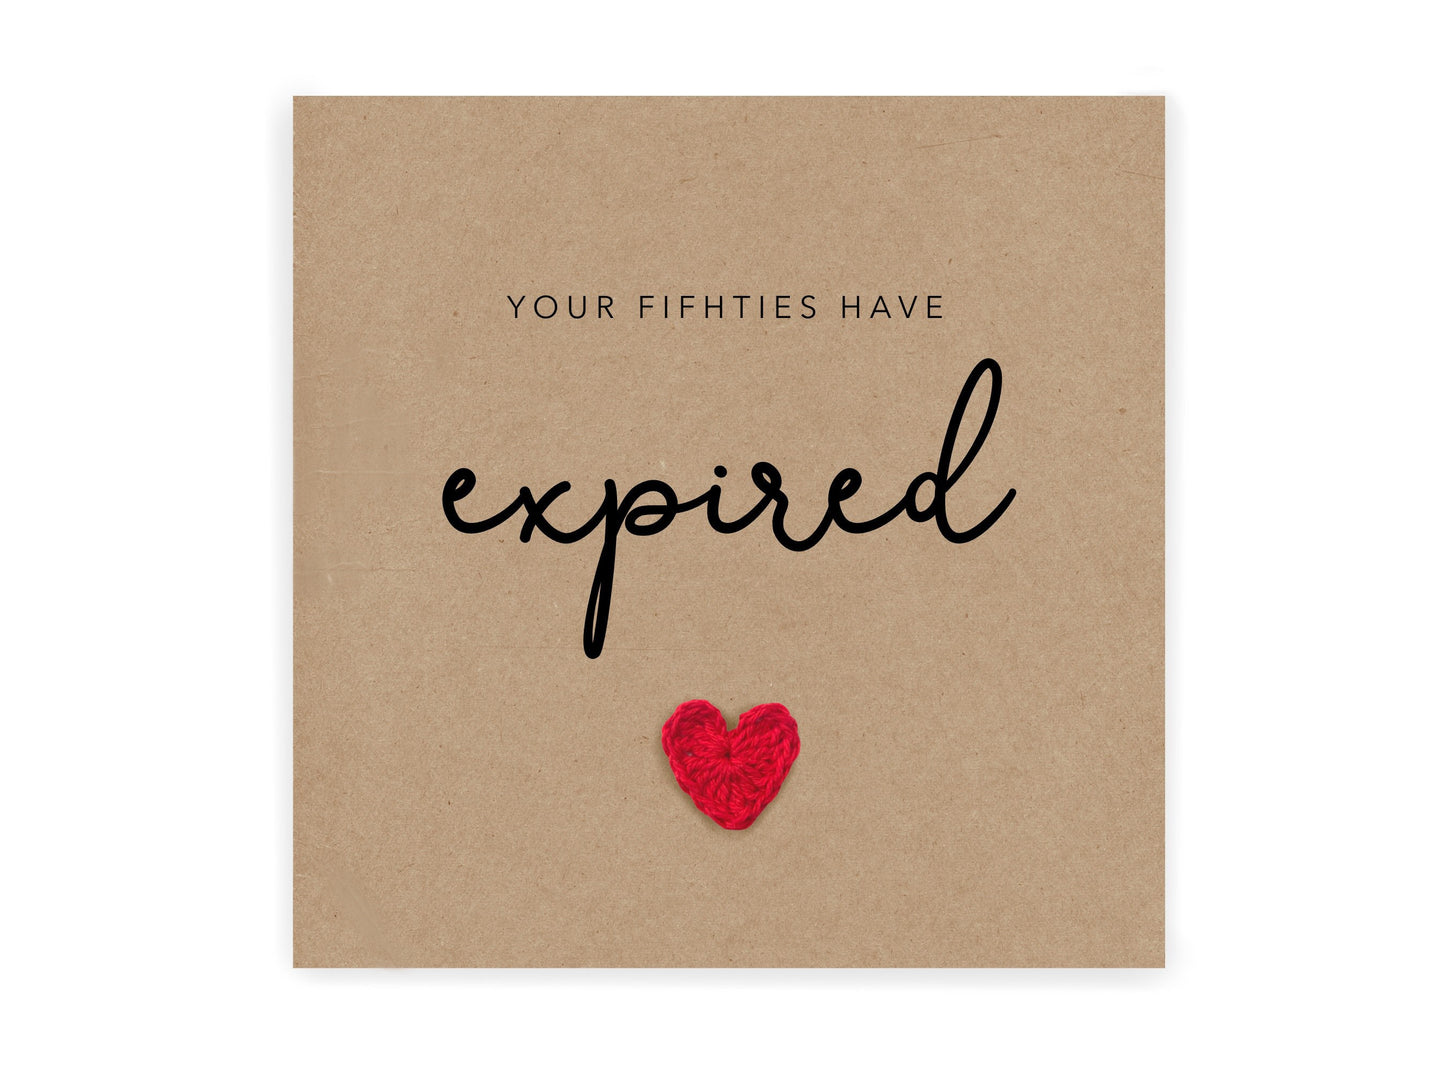 Funny 50th Birthday Card For Her, Your forties Have Expired, Joke Birthday, Funny Fiftieth Birthday Card, Big Milestone Birthday, 50th